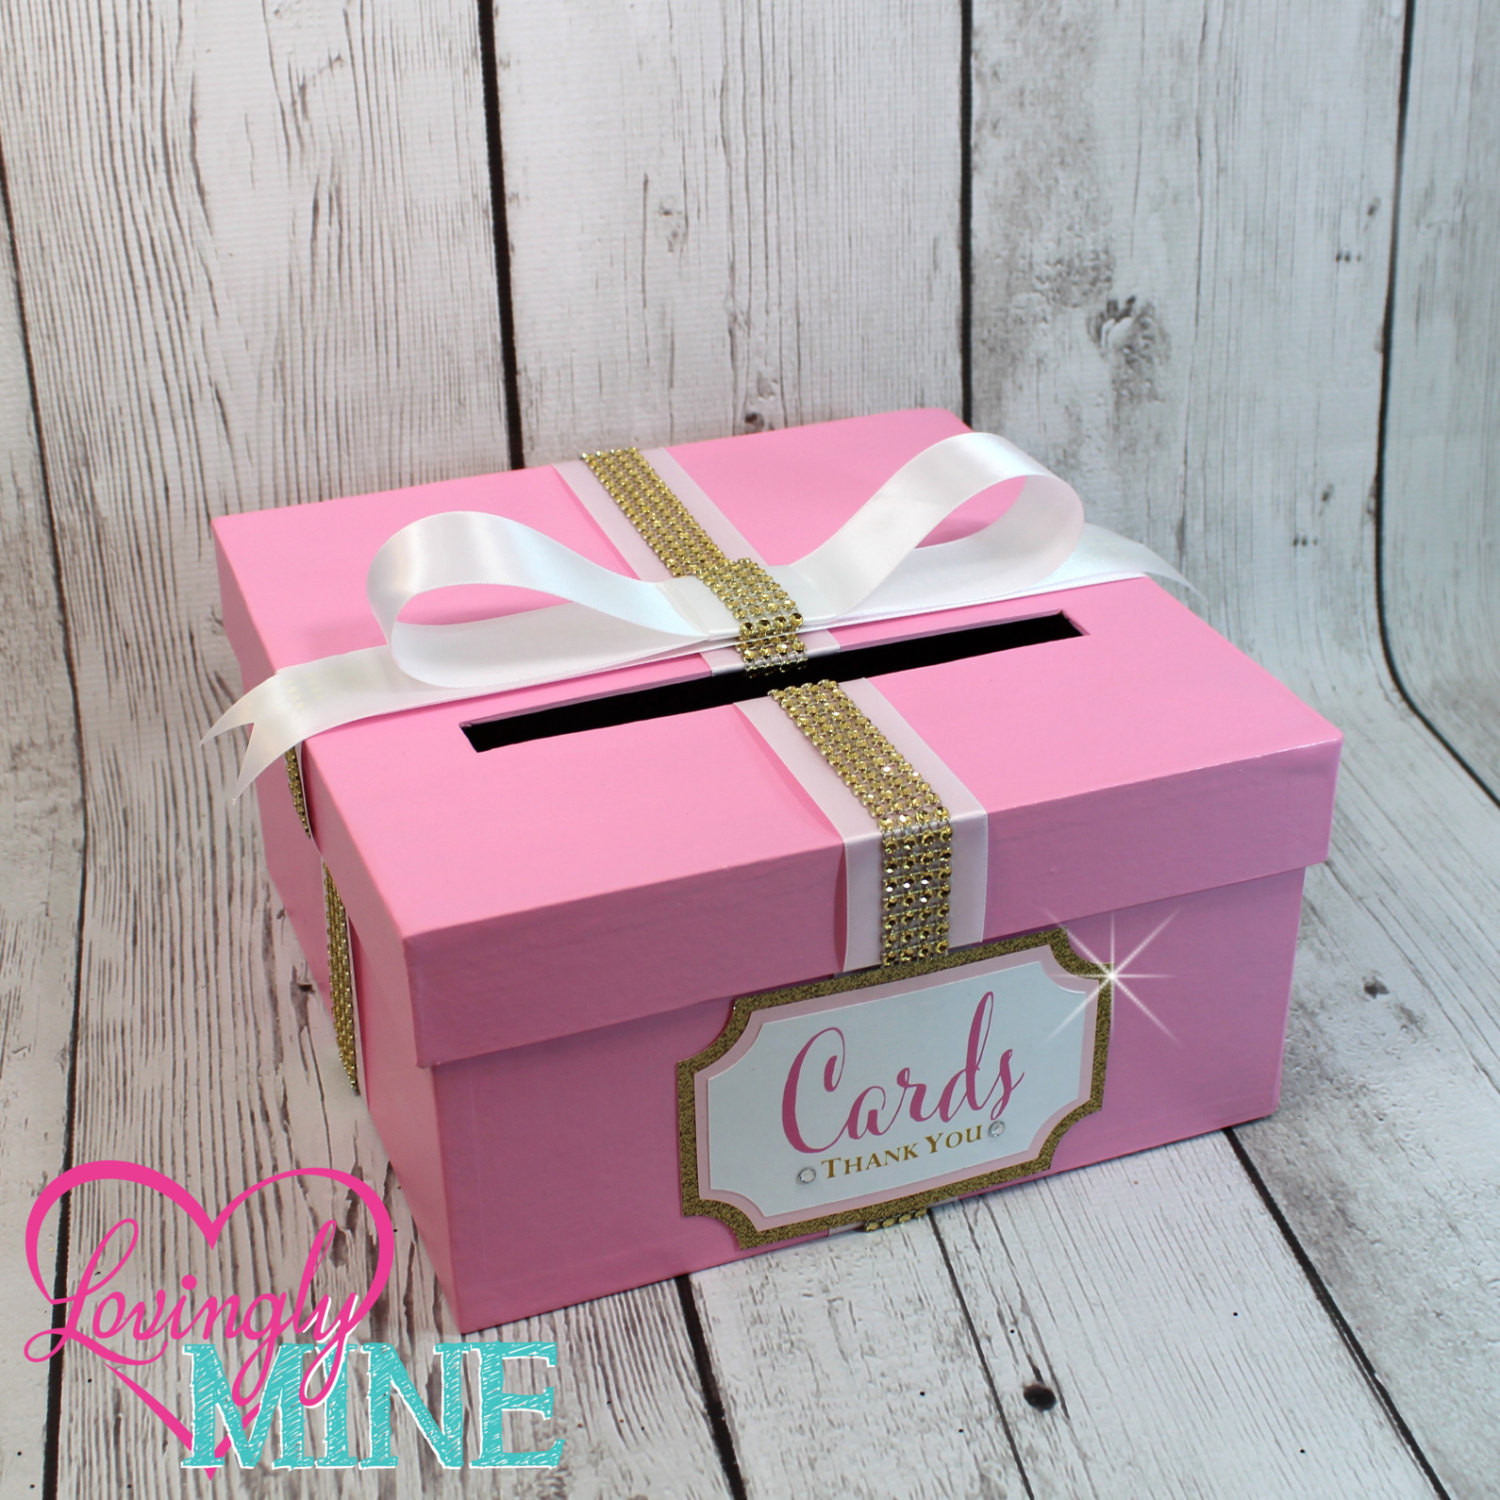 Birthday Box Gift Ideas
 Card Holder Box with Sign in Pink Gold & White Gift Money